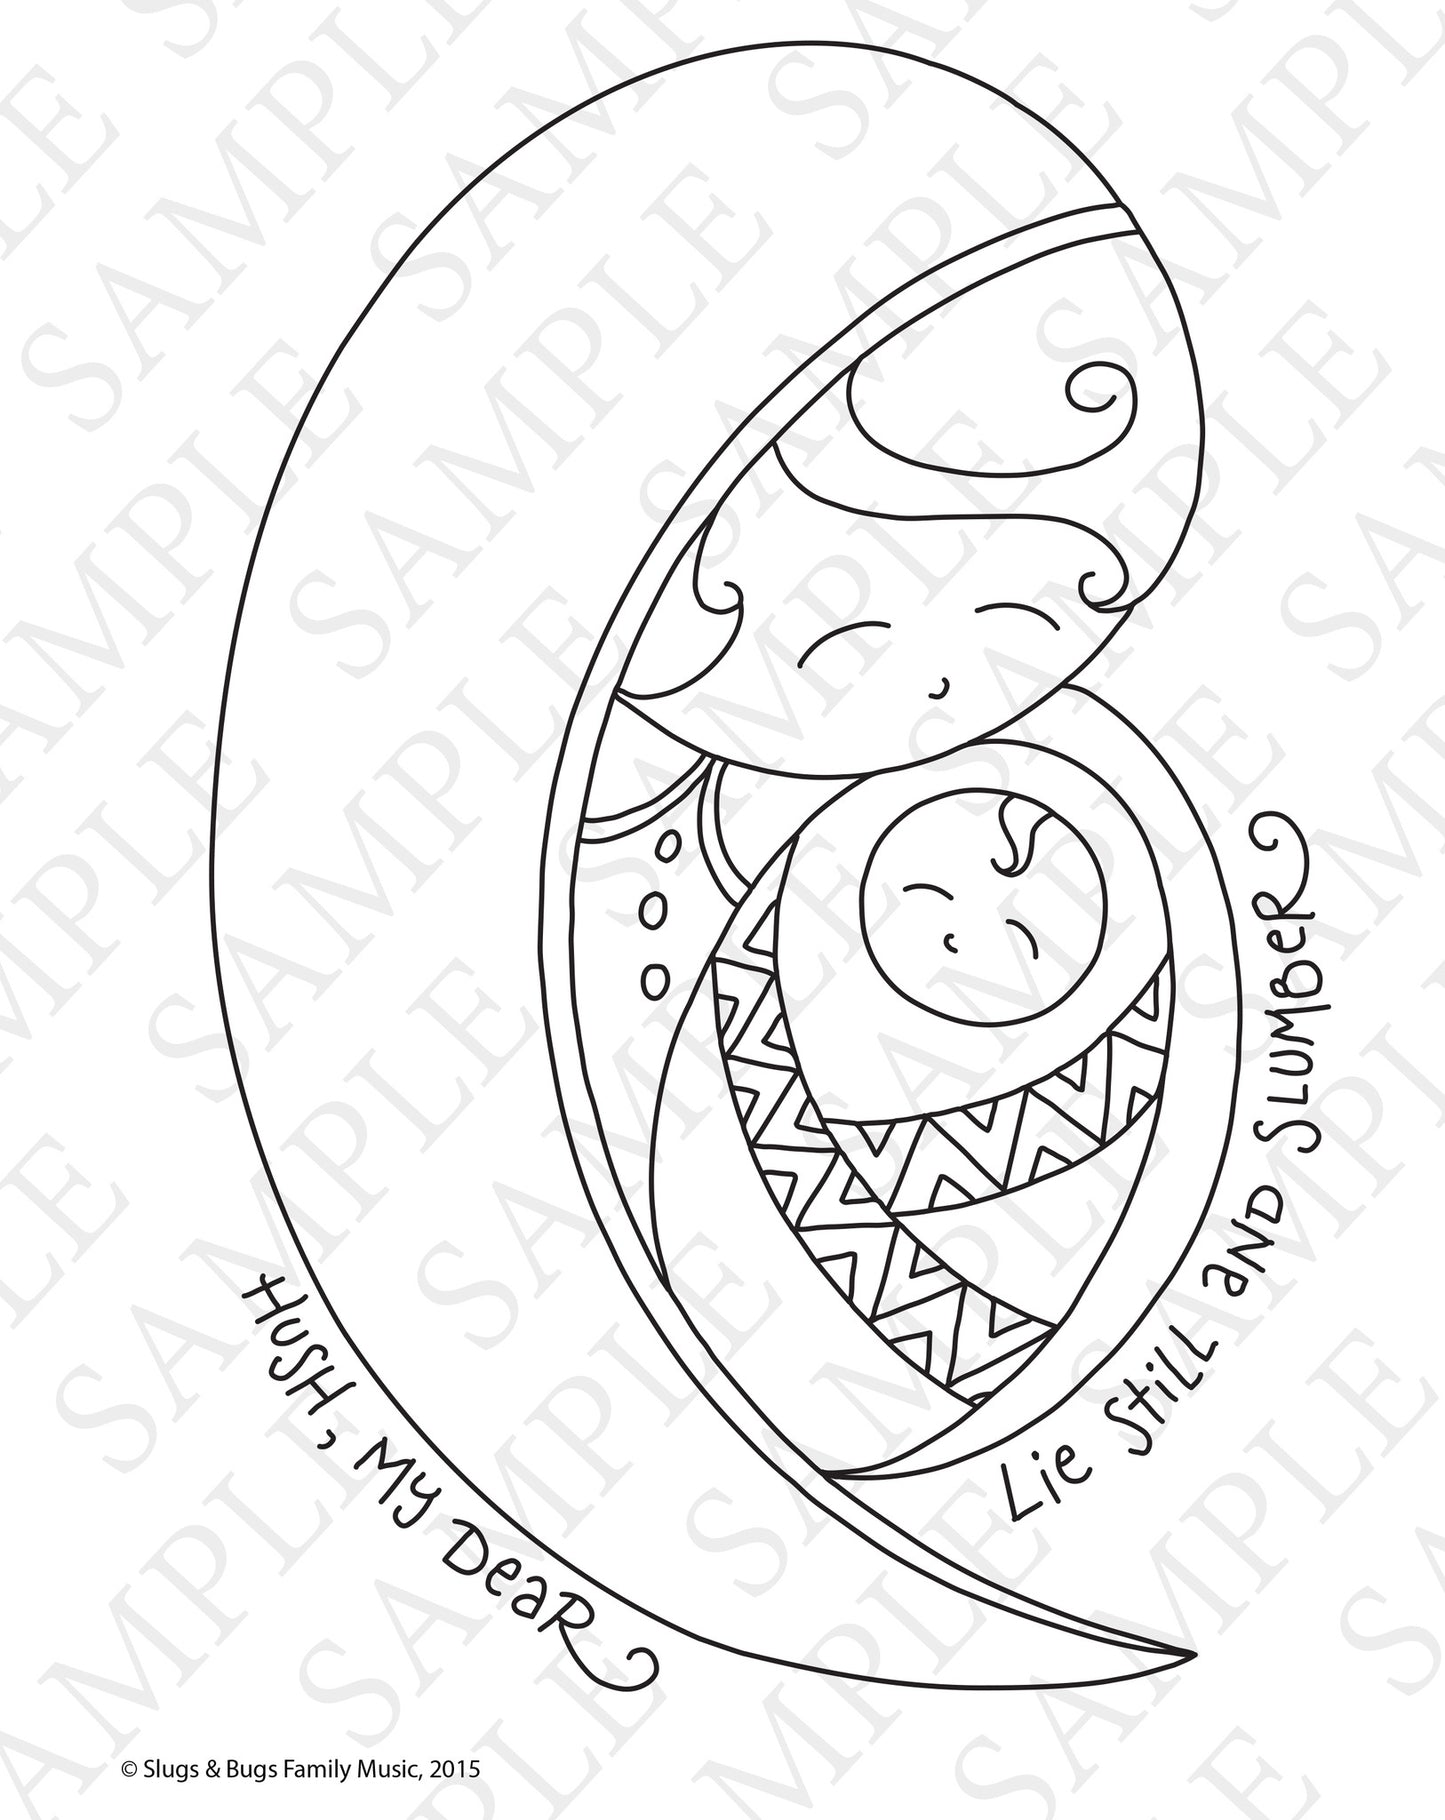 Slugs & Bugs Christmas Coloring Pages